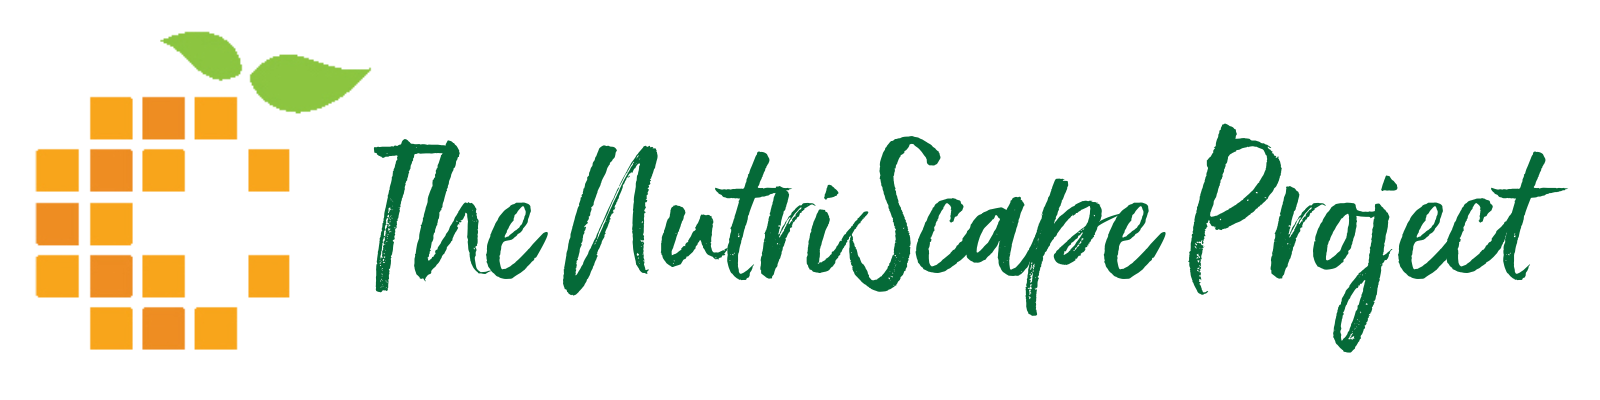 The NutriScape Project